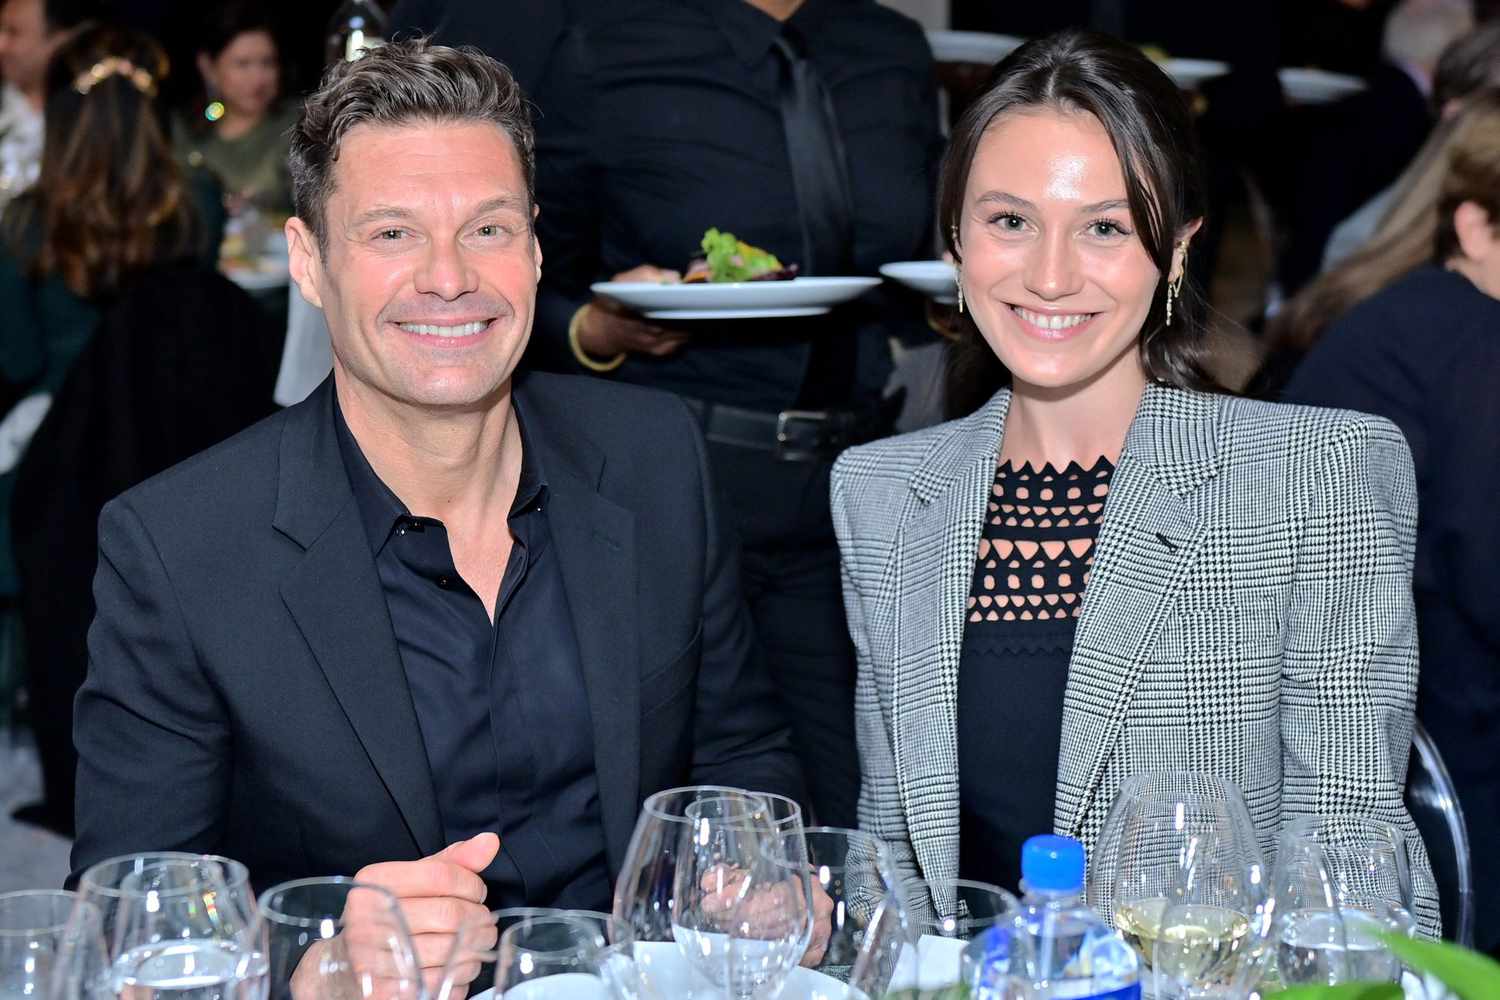 LOS ANGELES, CALIFORNIA - APRIL 23: (L-R) Ryan Seacrest and Aubrey Paige attend LACMA 2022 Collectors Committee Gala at Los Angeles County Museum of Art on April 23, 2022 in Los Angeles, California. (Photo by Stefanie Keenan/Getty Images for LACMA)